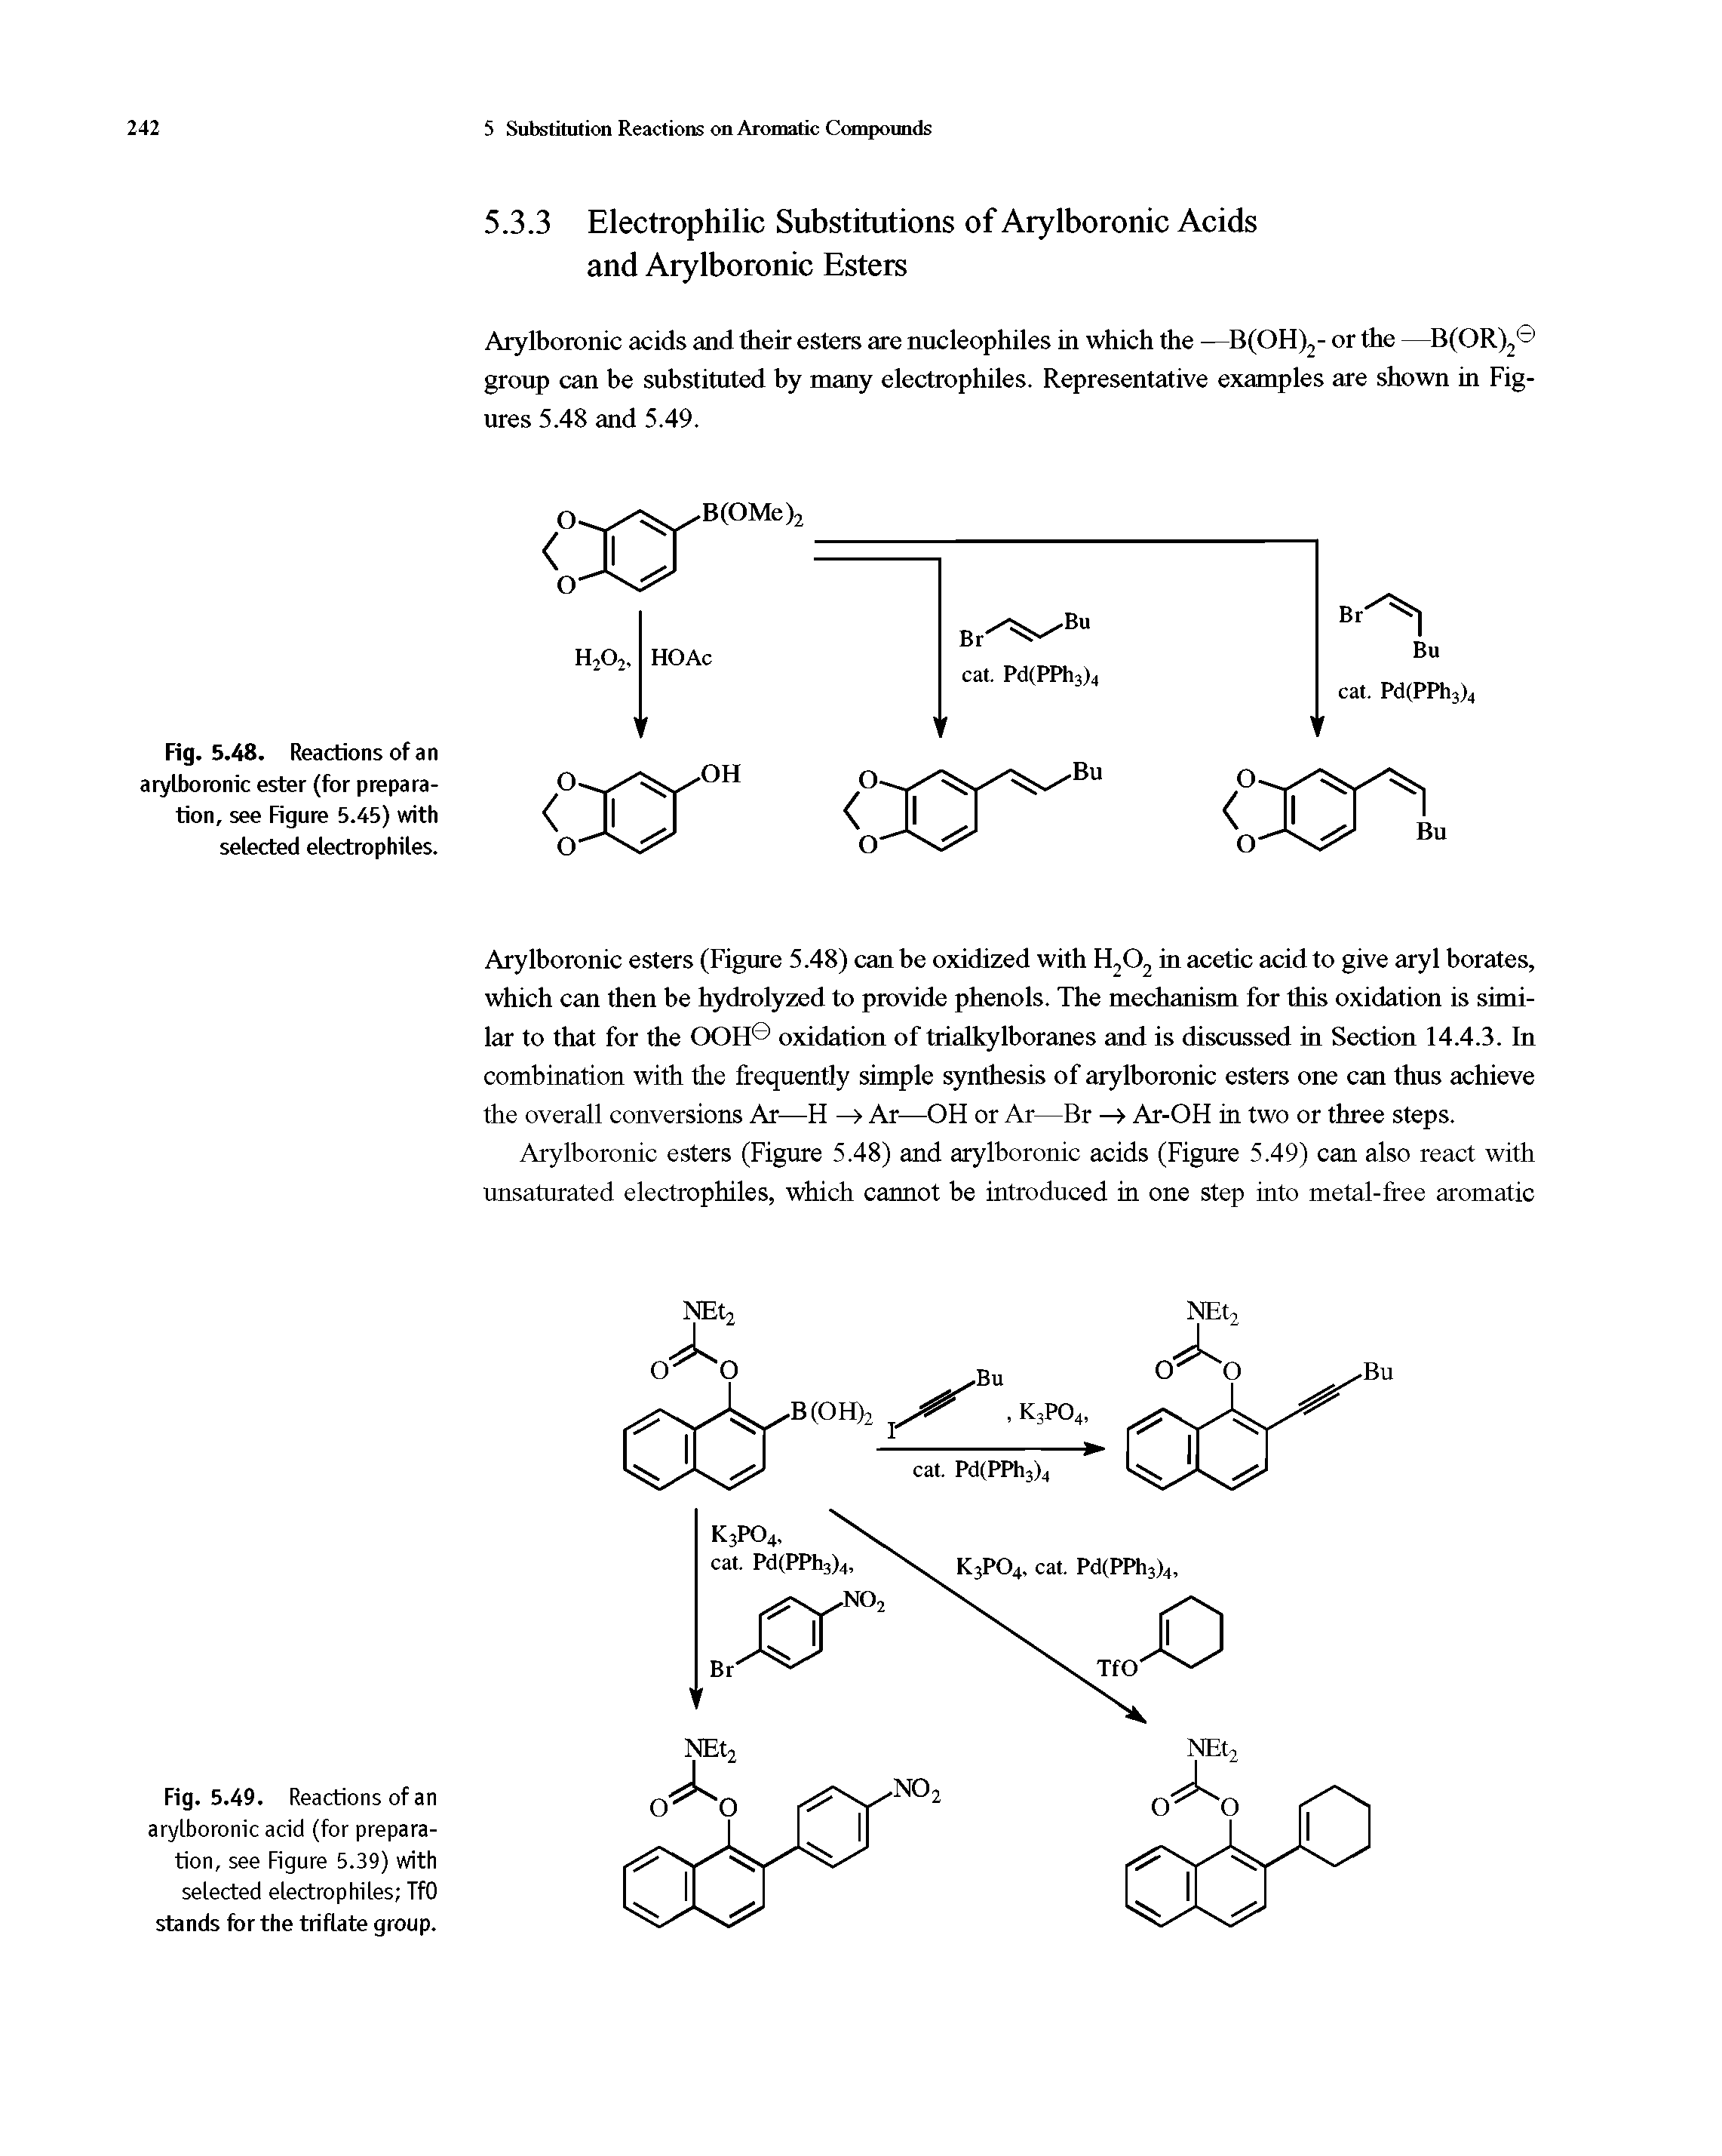 Fig. 5.48. Reactions of an arylboronic ester (for preparation, see Figure 5.45) with selected electrophiles.